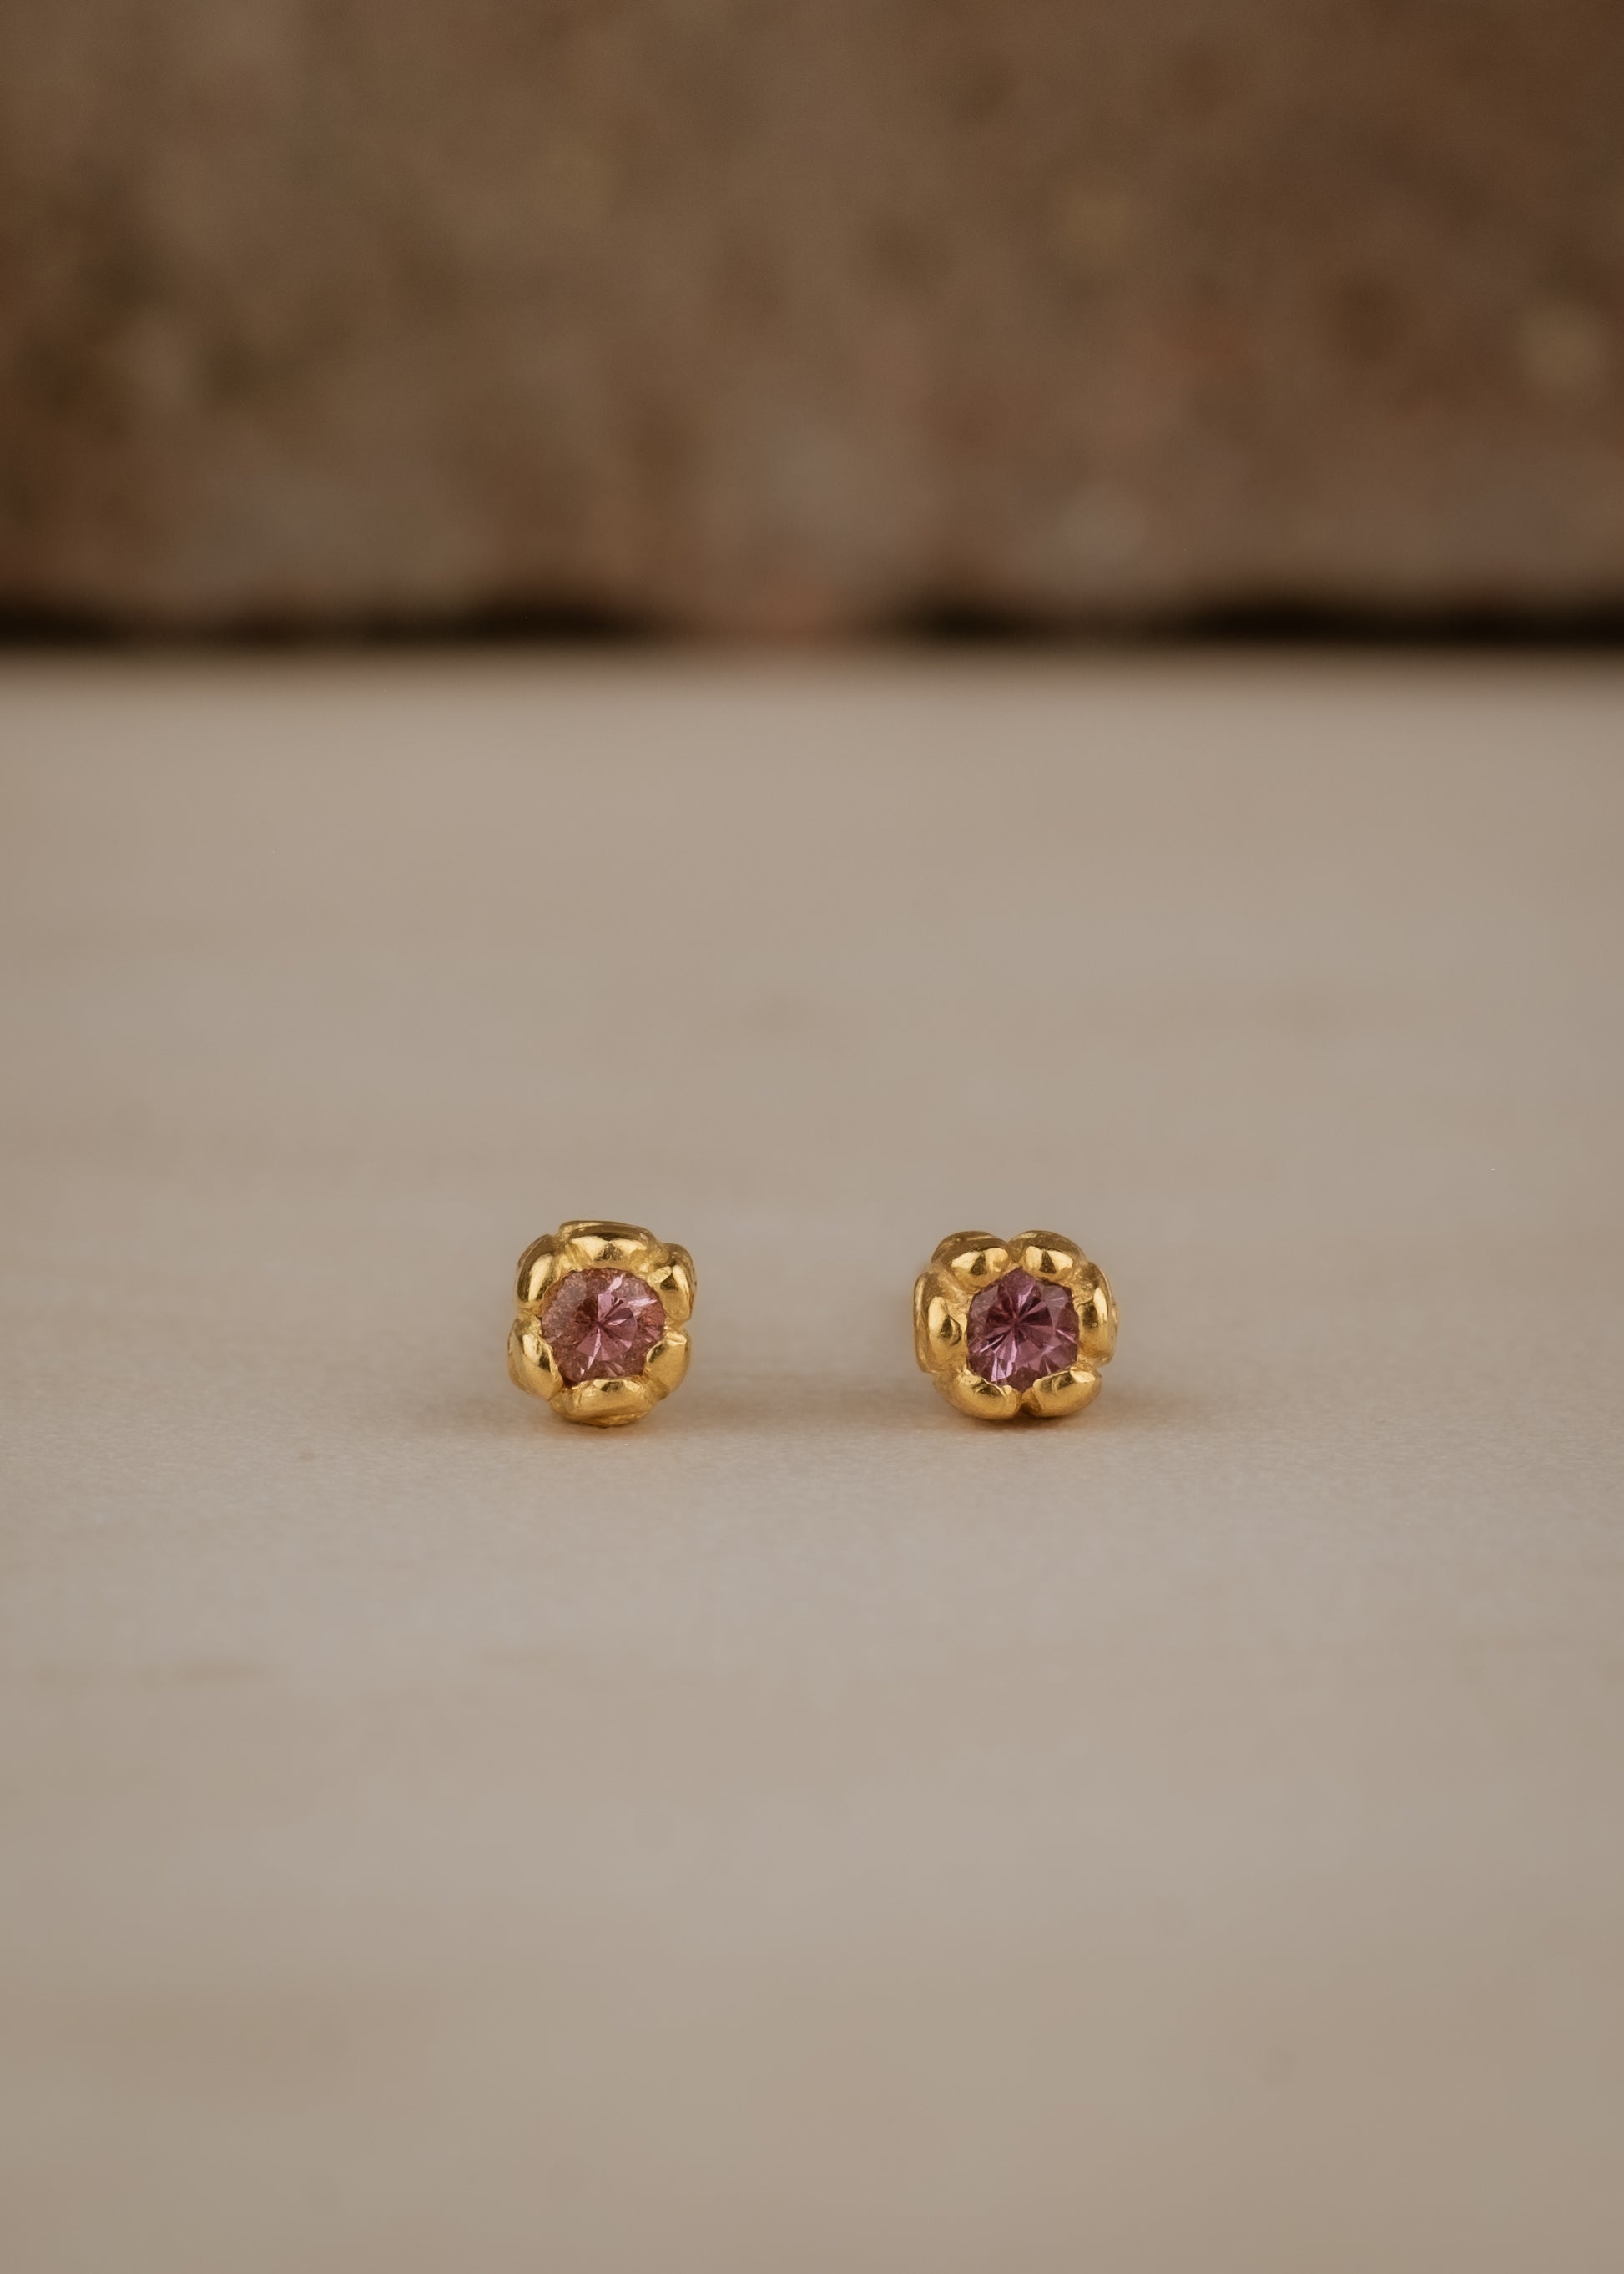 Inspired by a set of rings purchased for a childhood crush, the Bey earrings merge the simplicity of days past with a refined sophistication. Hand-crafted gold petals form a cocoon around a stunning pink sapphire, creating delicate earrings perfect for celebrating the everyday. 